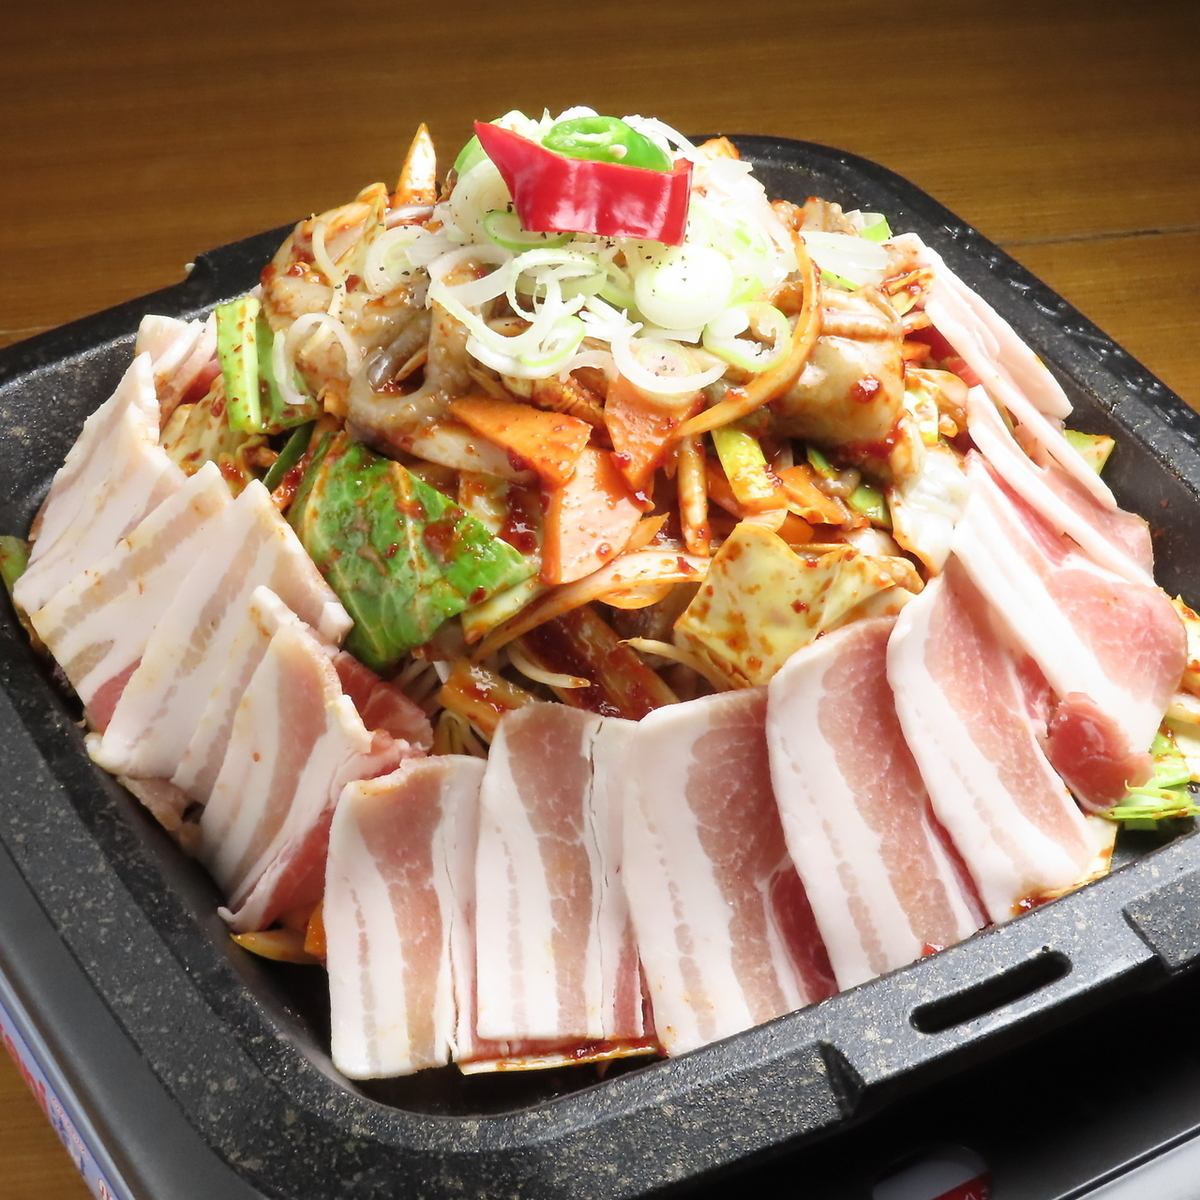 Authentic Korean taste! The delicious octopus chukmi samgyeopsal is also recommended.